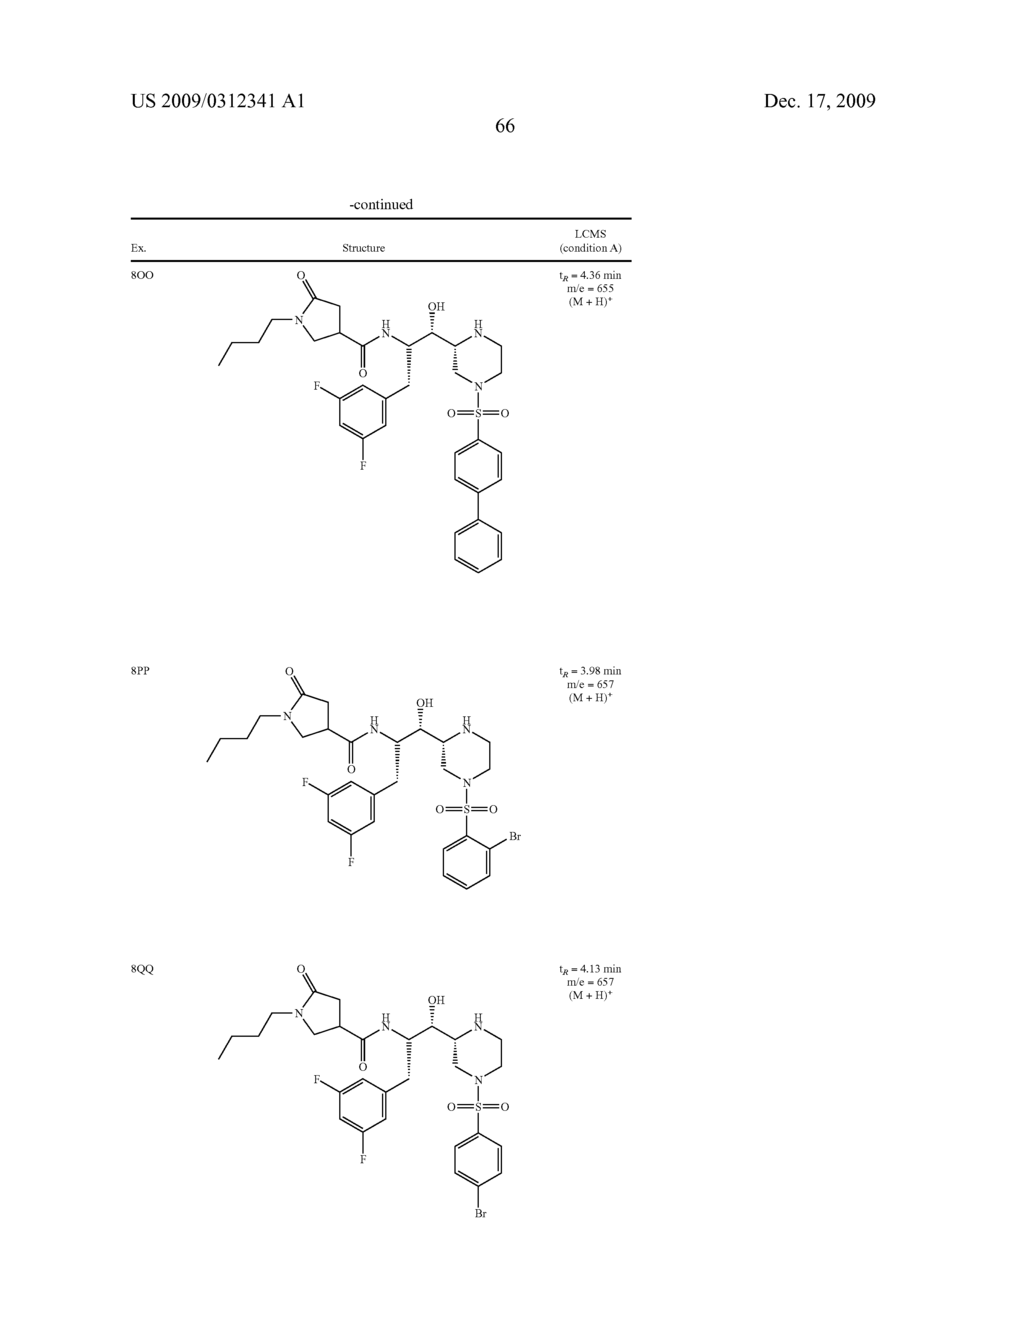 CYCLIC AMINE BACE-1 INHIBITORS HAVING A HETEROCYCLIC SUBSTITUENT - diagram, schematic, and image 67